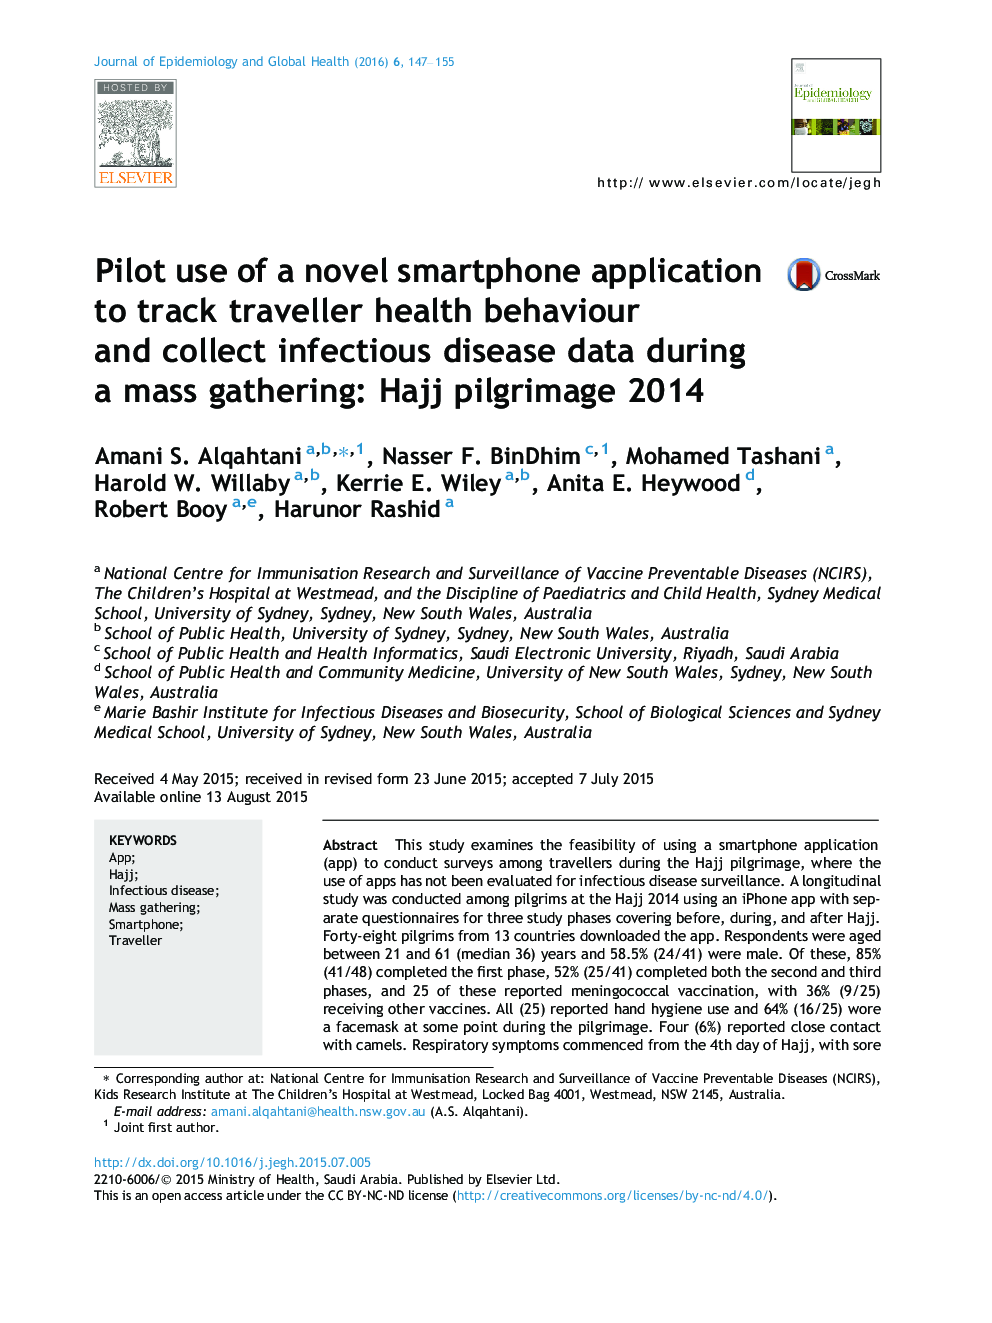 Pilot use of a novel smartphone application to track traveller health behaviour and collect infectious disease data during a mass gathering: Hajj pilgrimage 2014